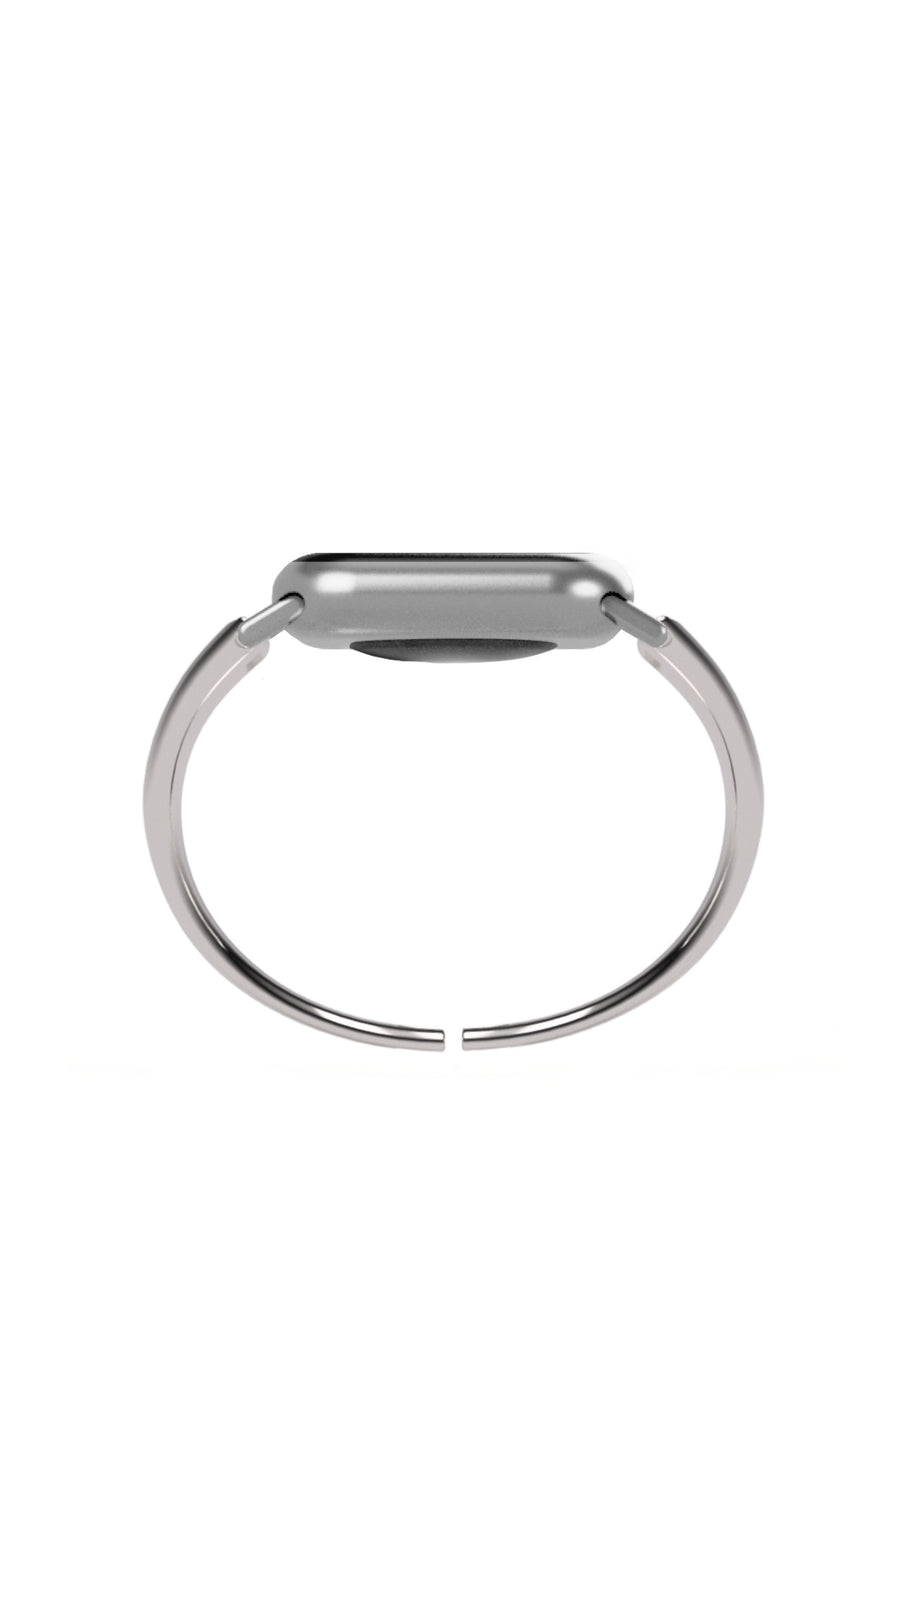 Apple Watch vintage - like silver band